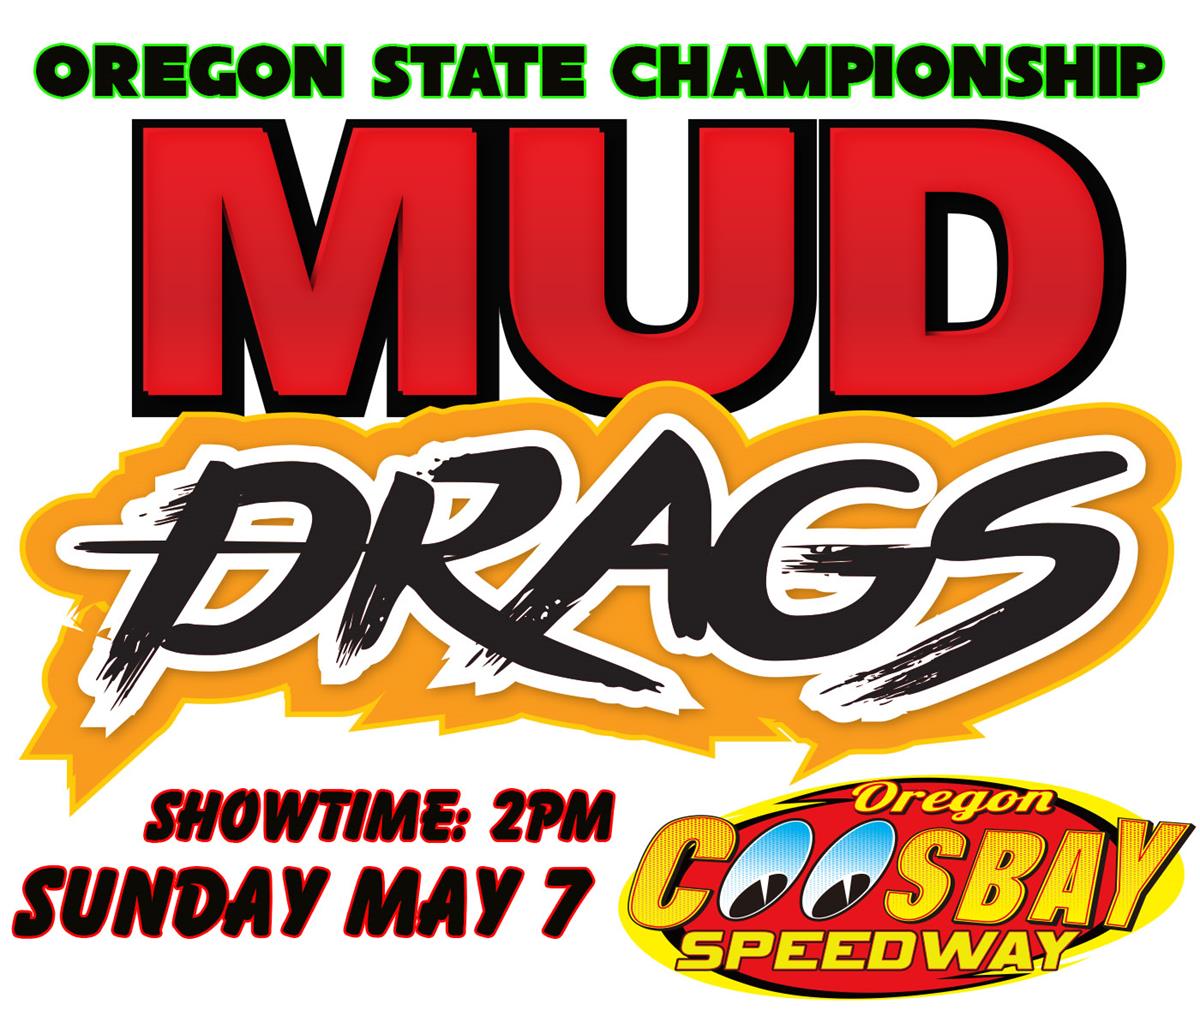 Oregon State Championships Mud Drags Sunday, May 7th